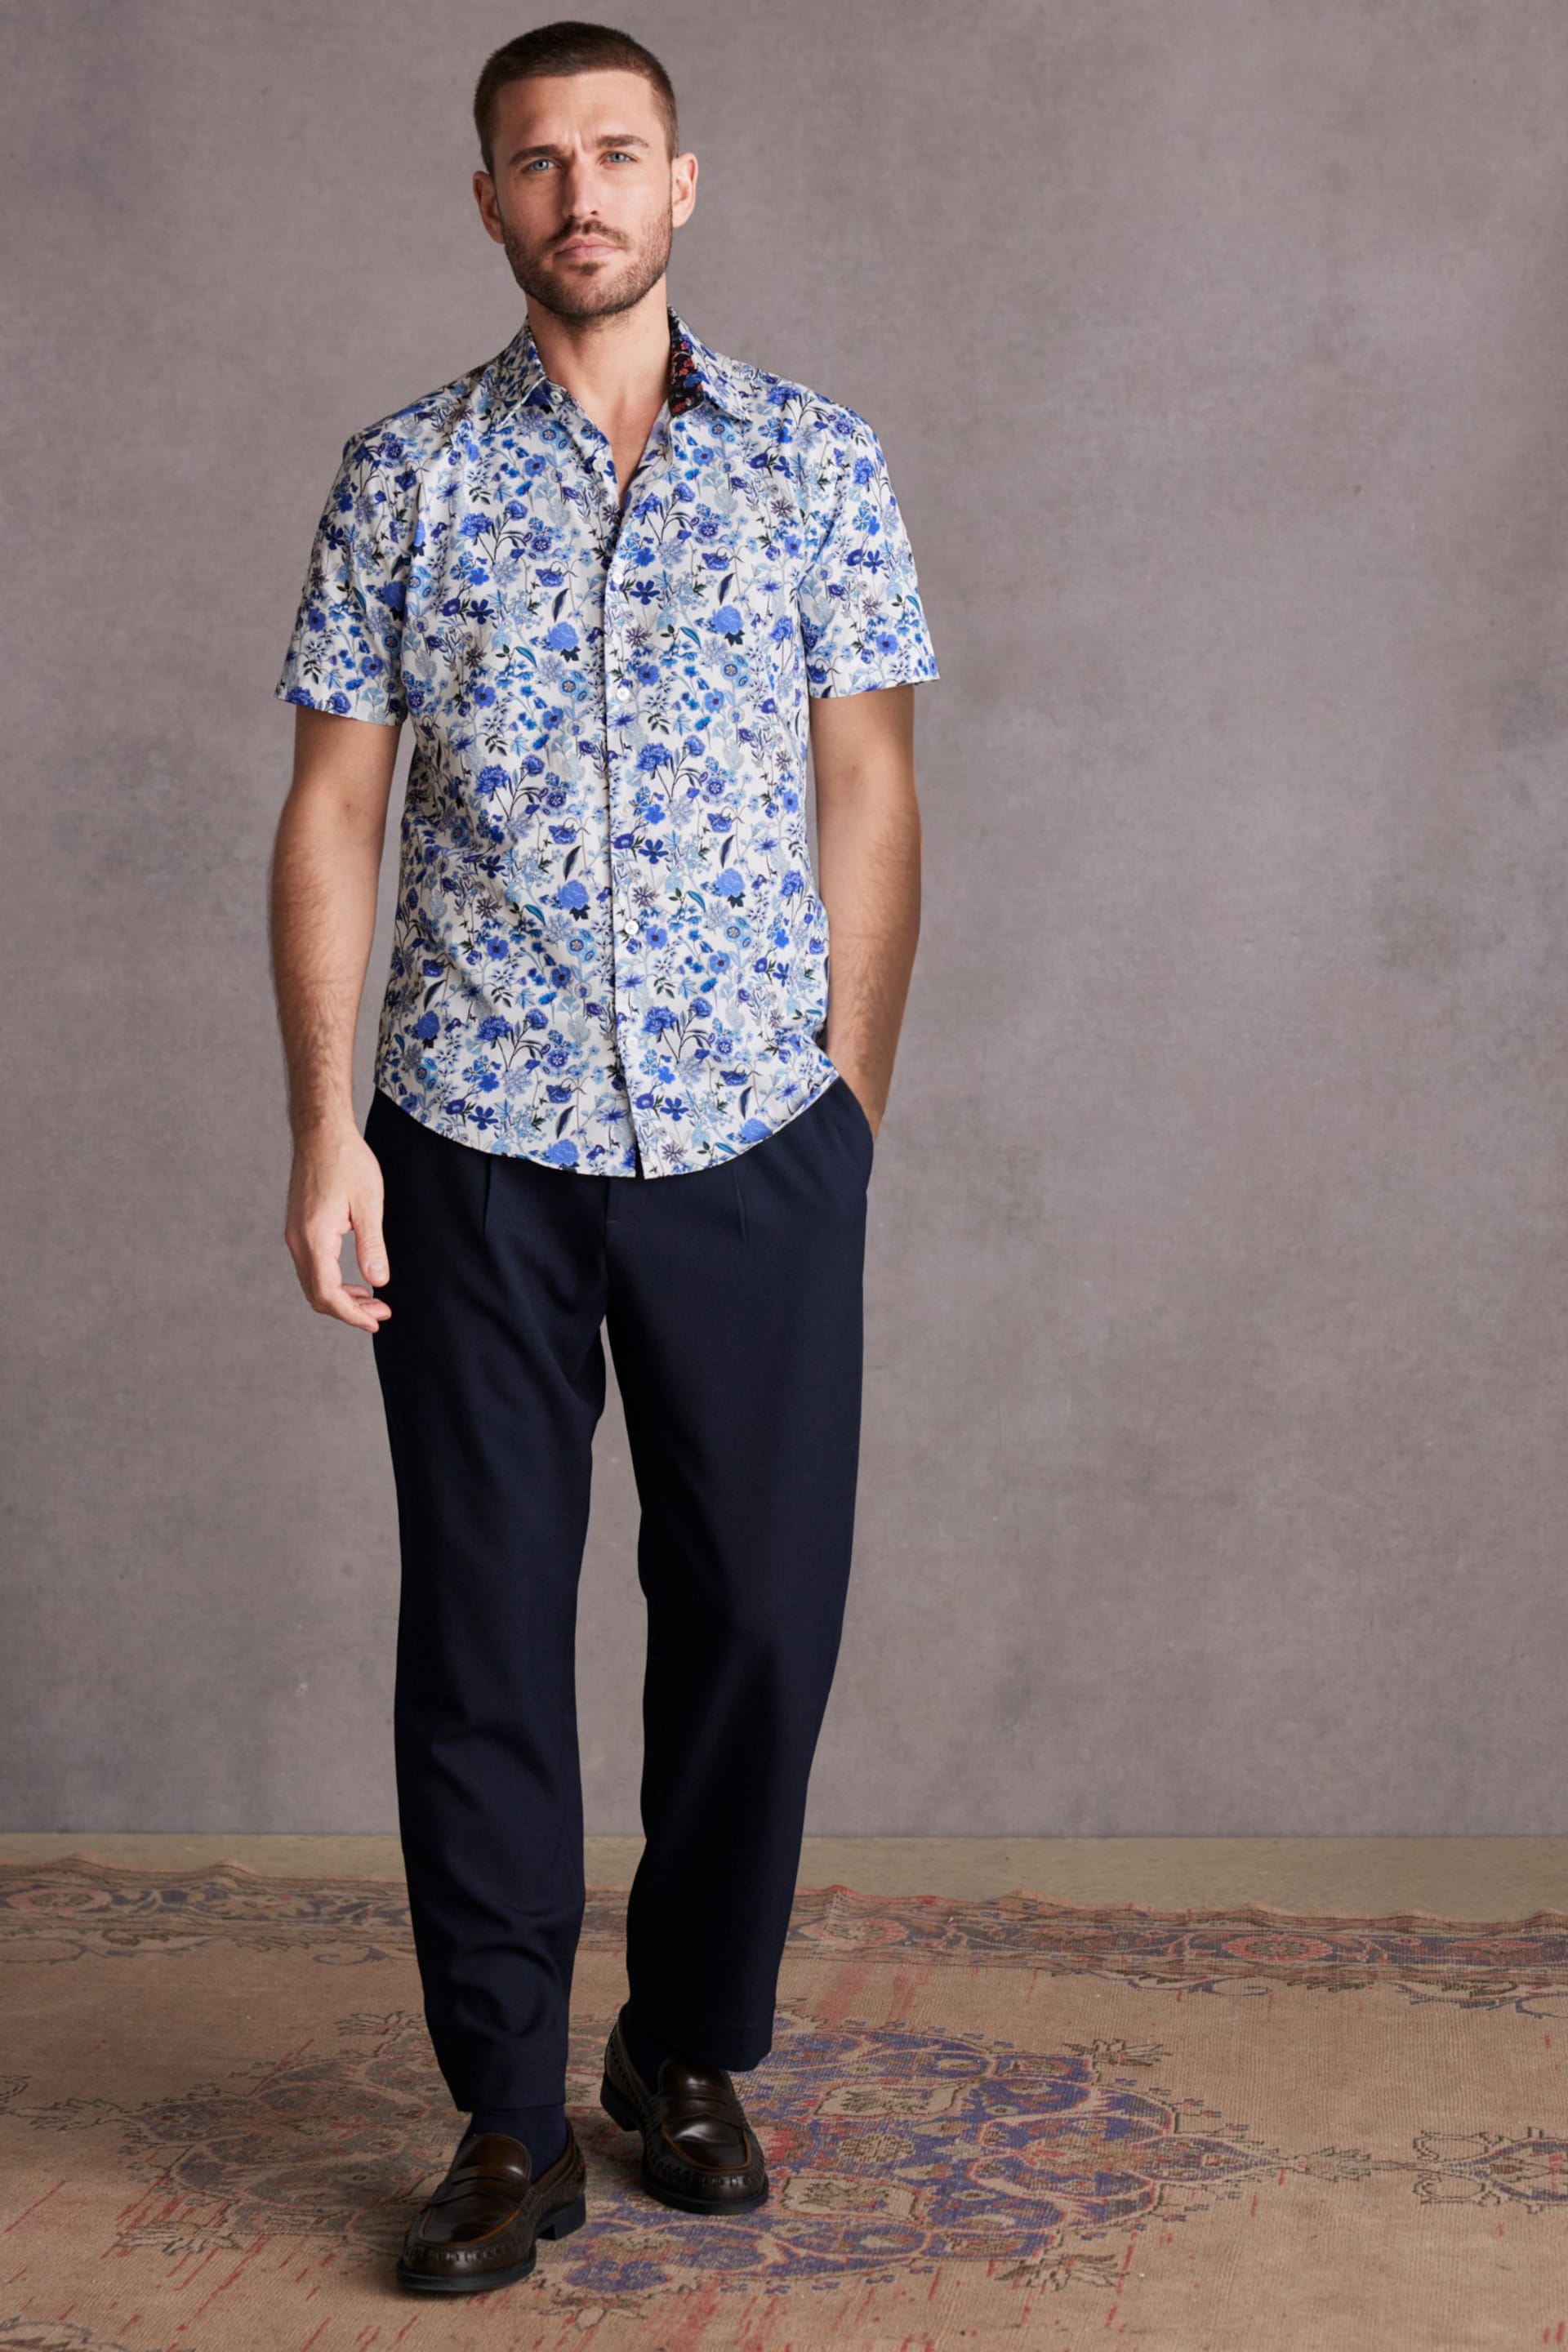 White/Blue Floral Signature Made With Italian Fabric Printed Short Sleeve Shirt - Image 2 of 7